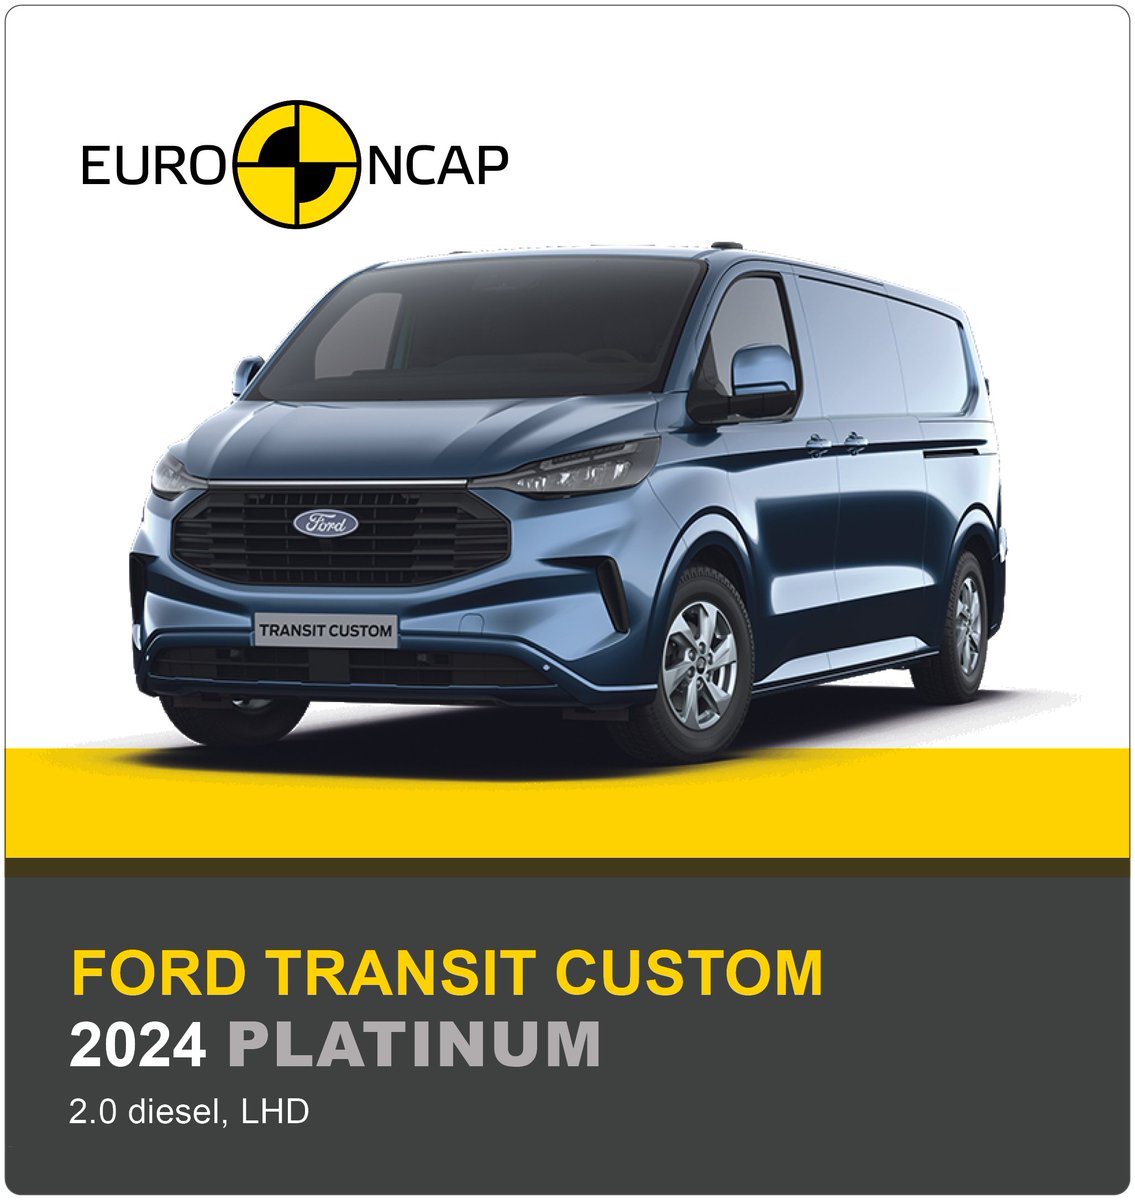 🏆 The Ford Transit Custom goes all out with a Platinum Award🏆 Euro NCAP awards the van a Safety Assist Performance of 96%. The mid-size van that is tested here is in second-generation form. euroncap.com/en/ratings-rew… 🚗 #Ford #forsafervans